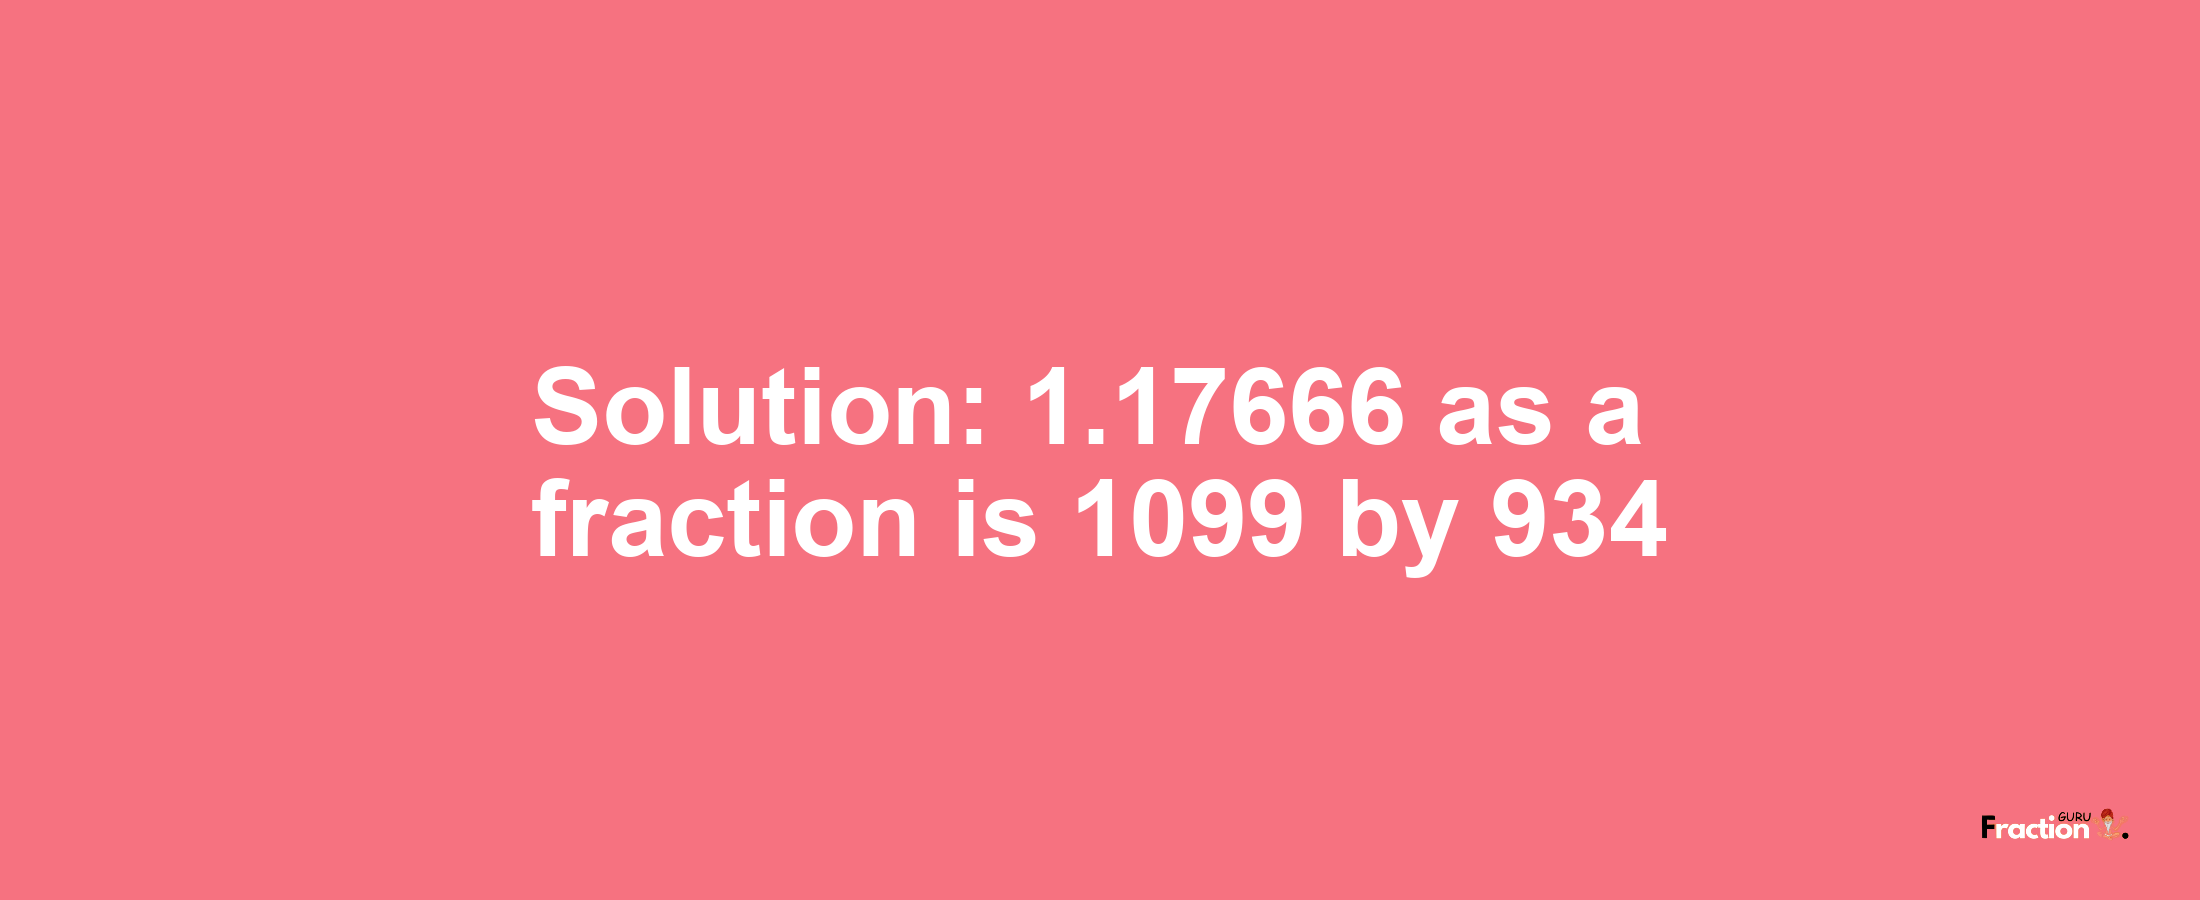 Solution:1.17666 as a fraction is 1099/934